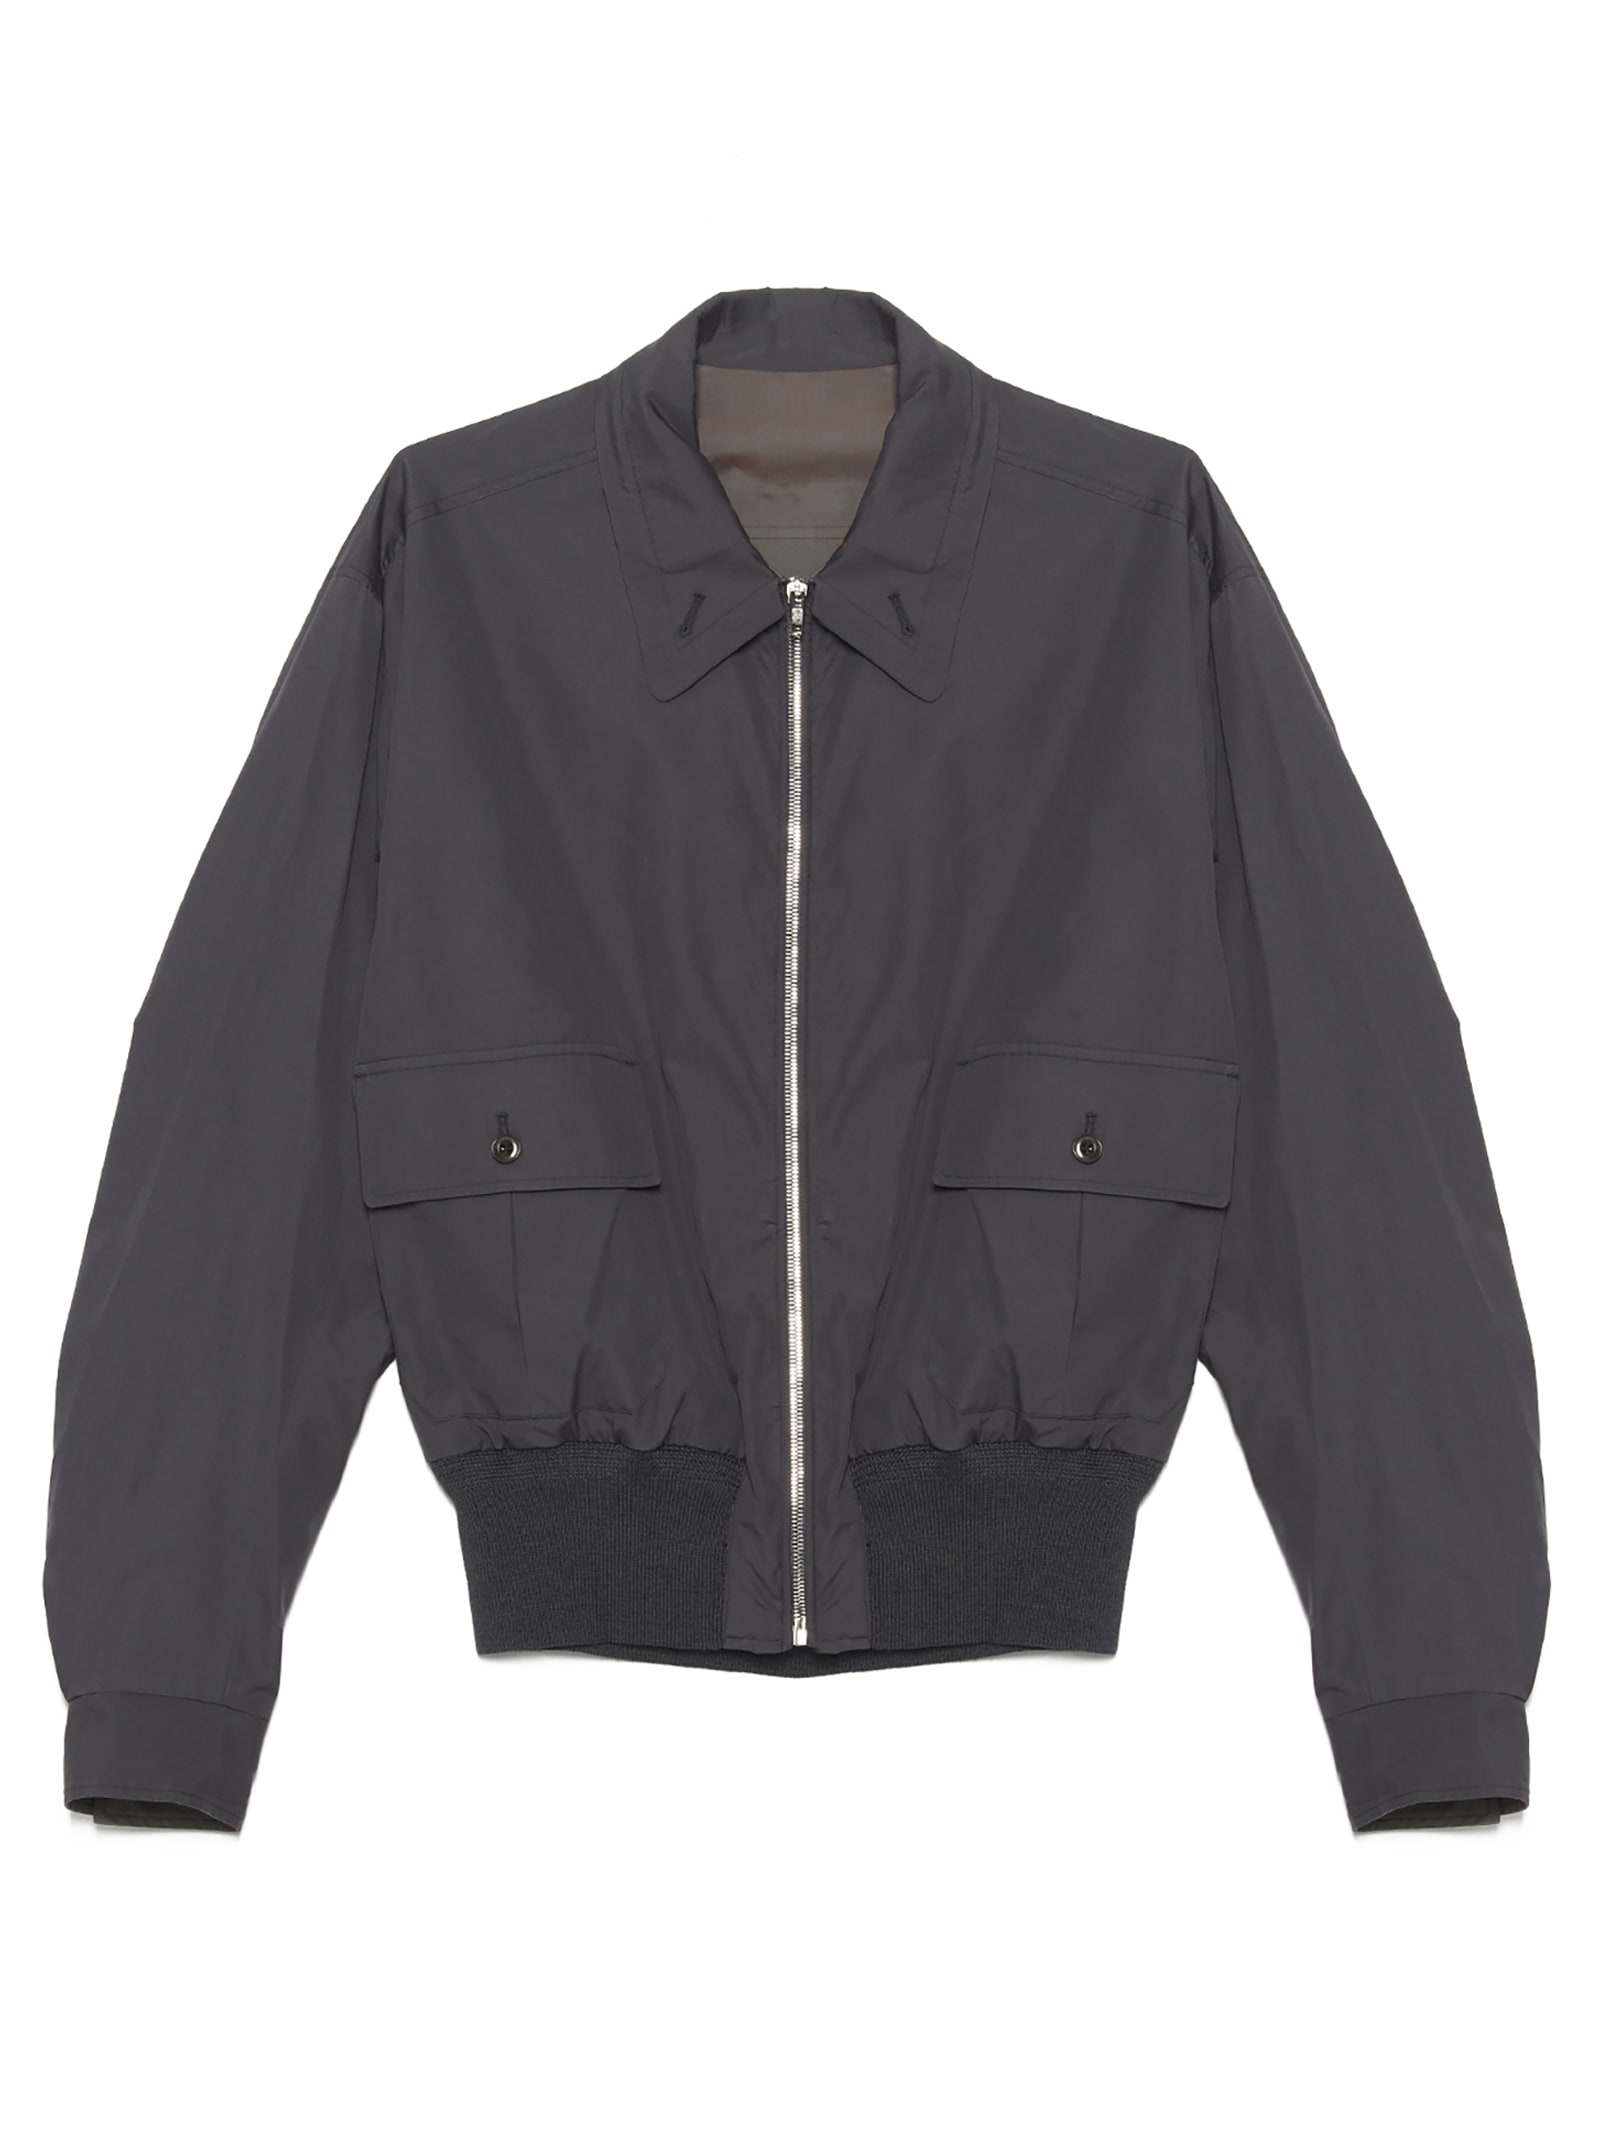 Lemaire Jackets | italist, ALWAYS LIKE A SALE